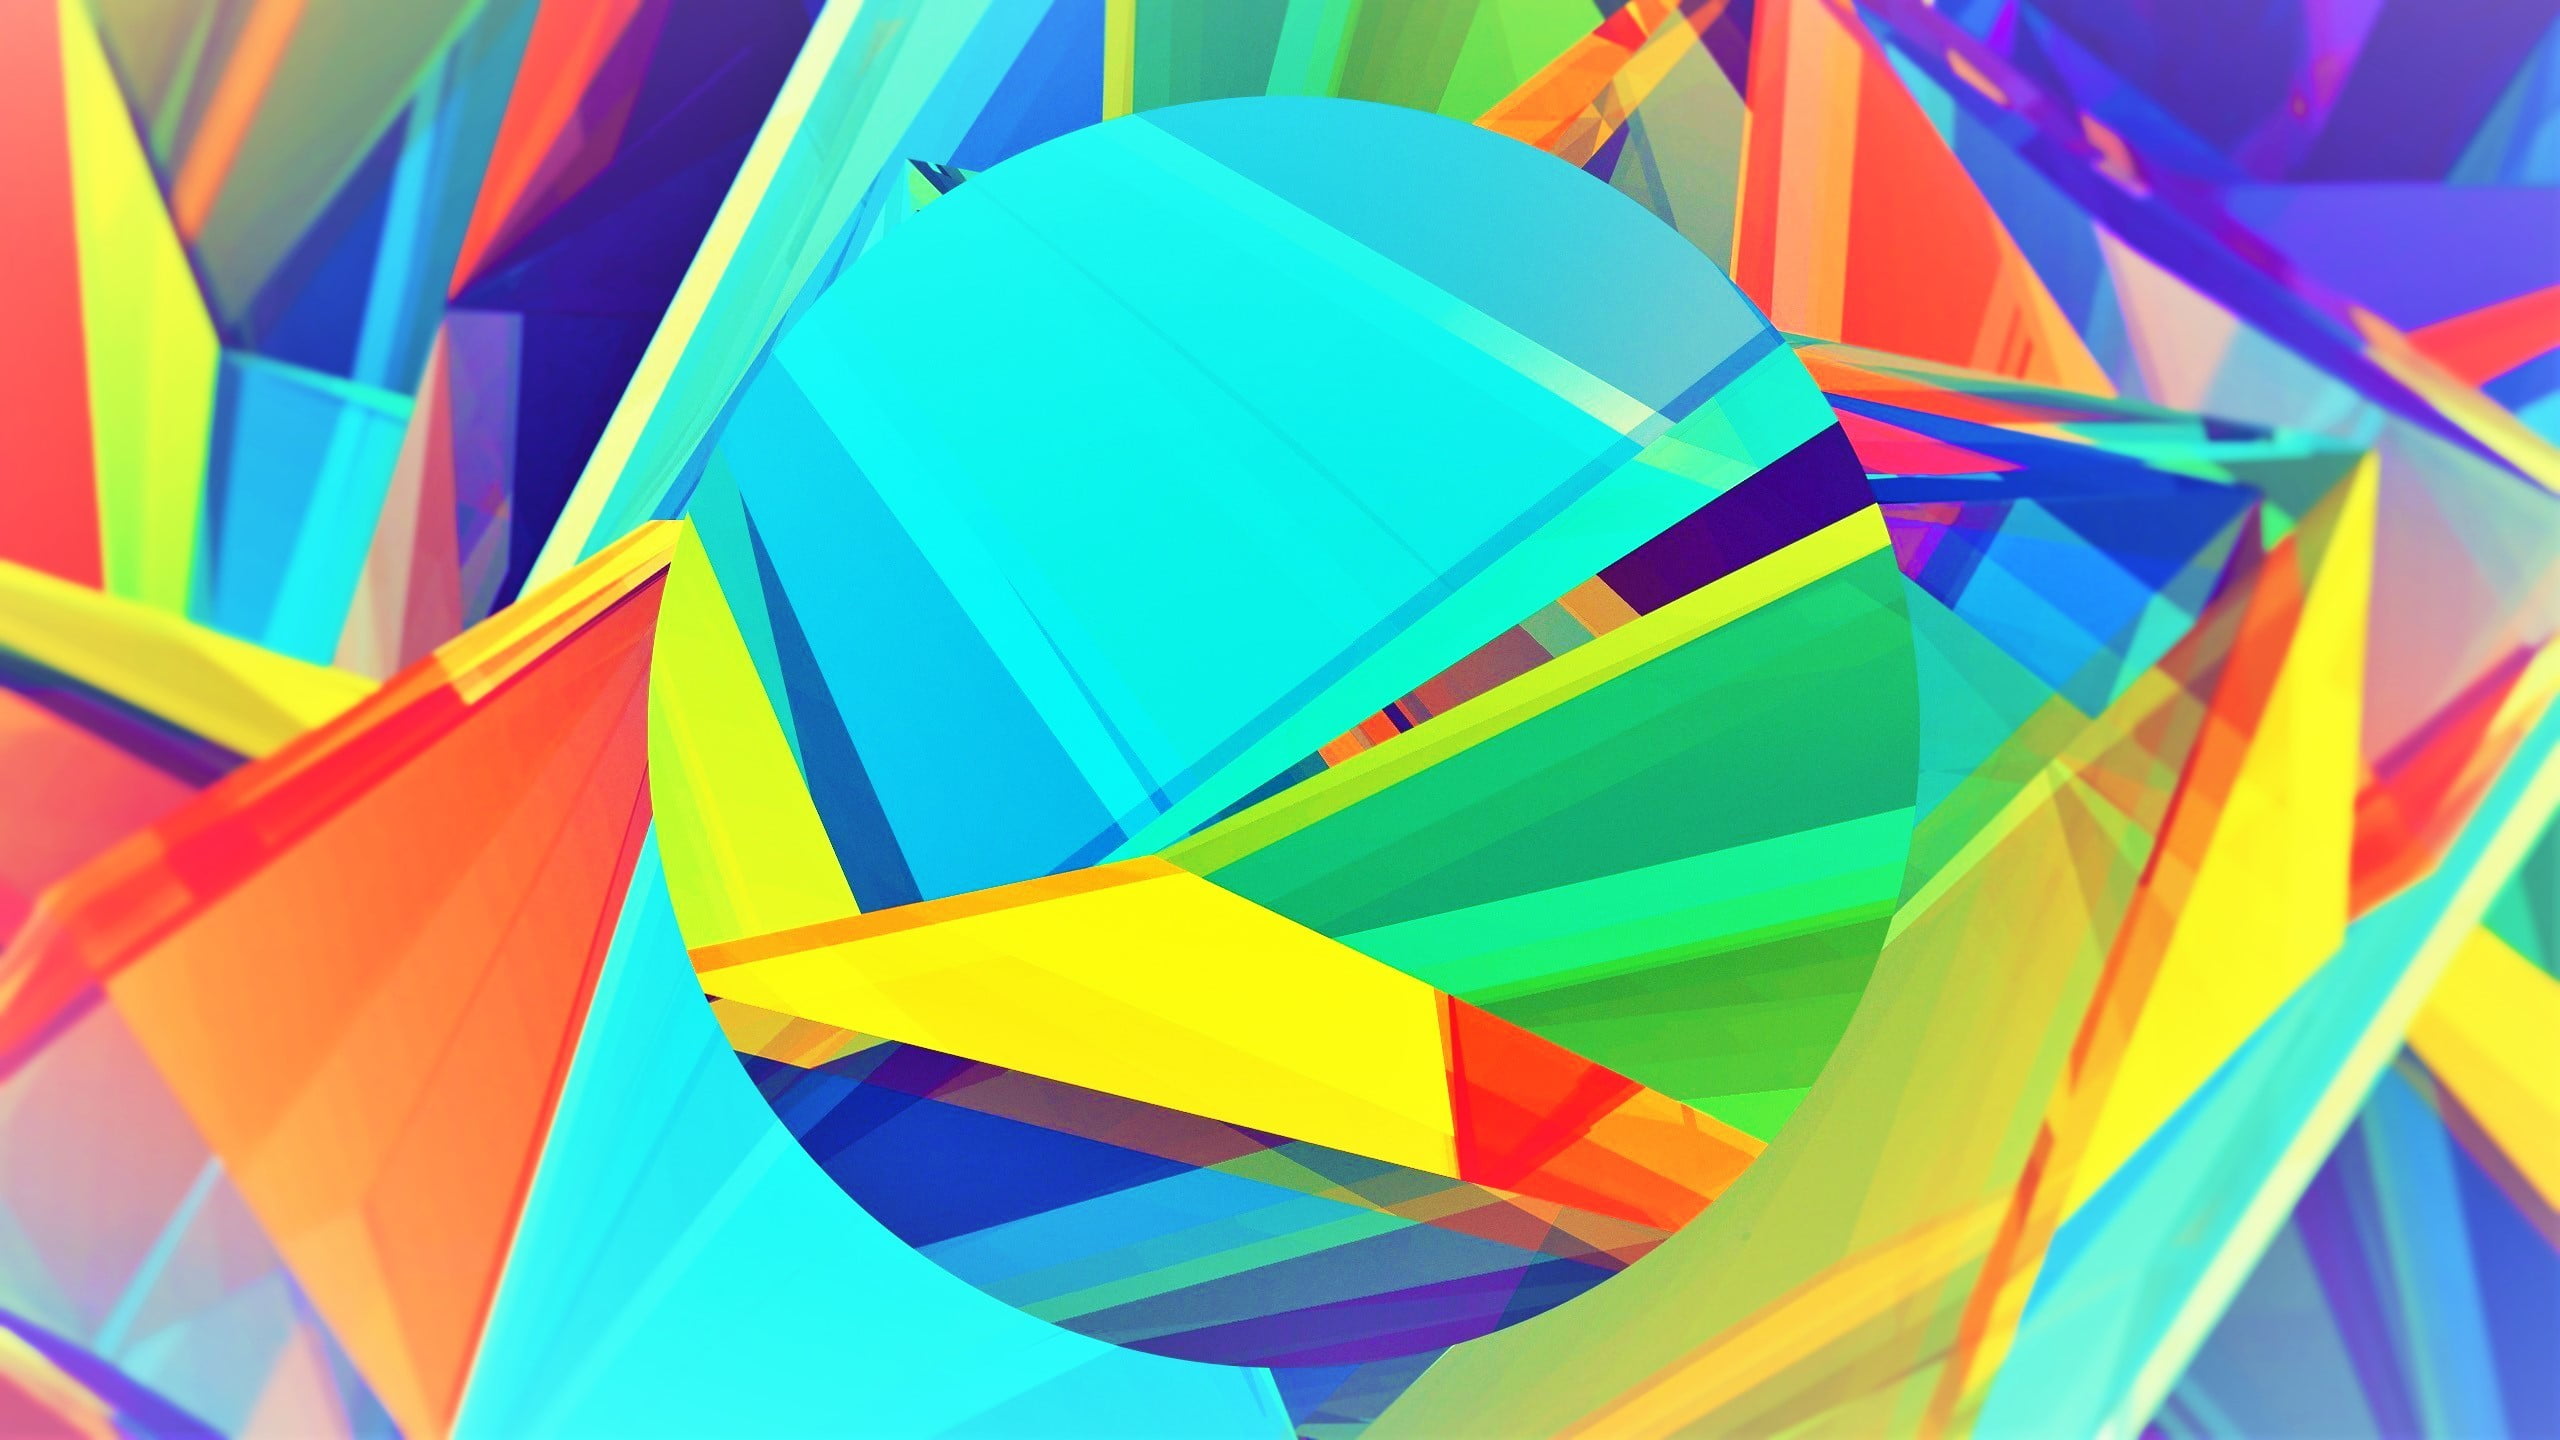 blue, yellow, and red tent, abstract, 3D, colorful, yellow